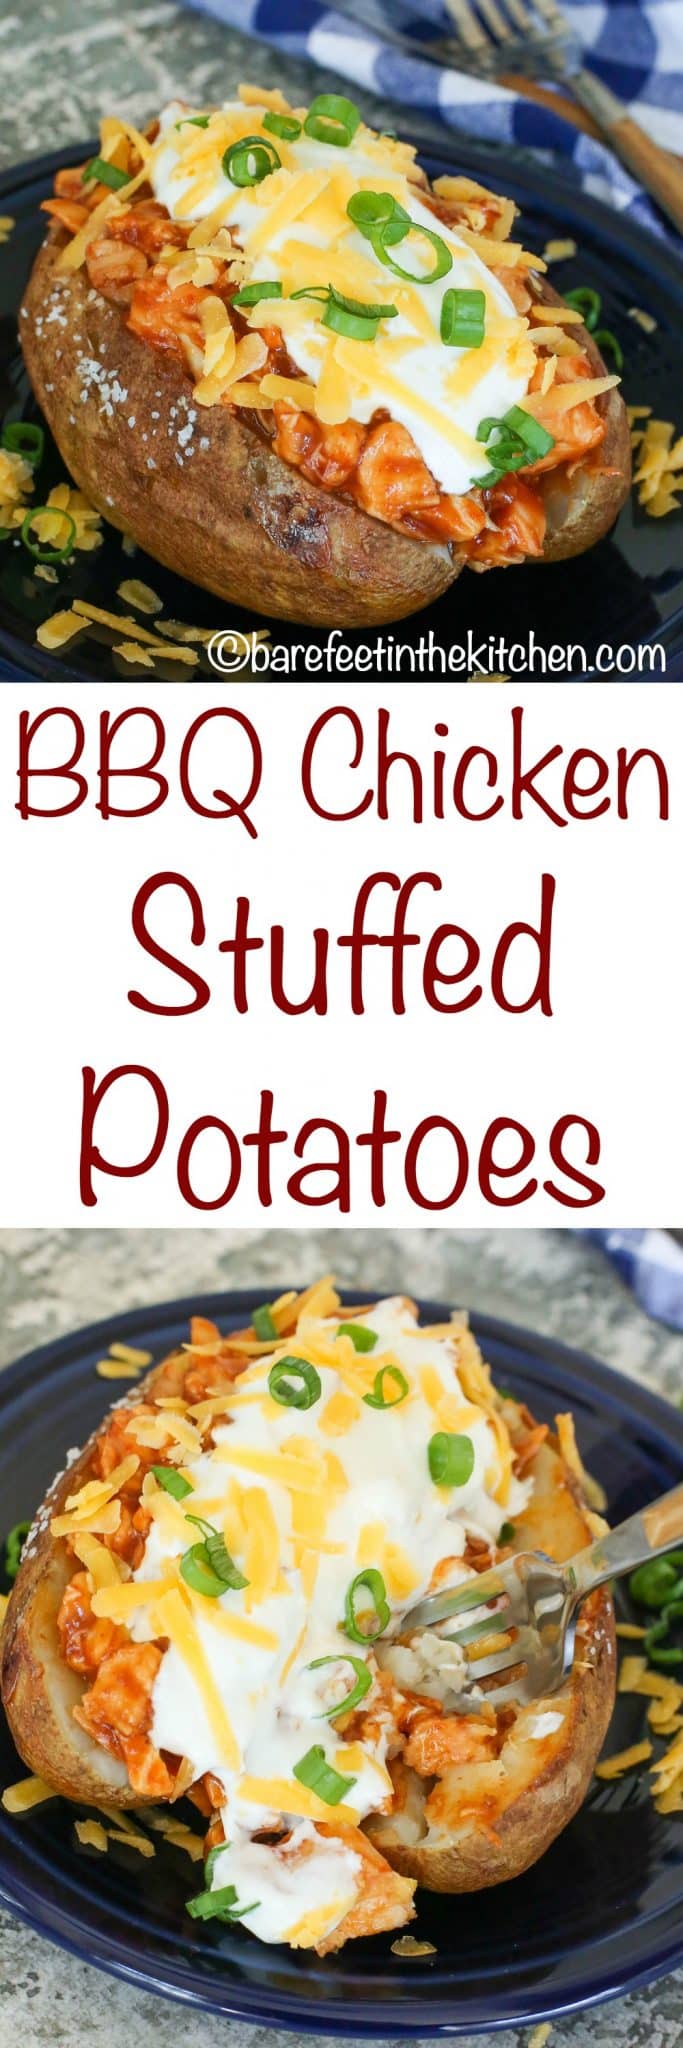 BBQ Chicken Stuffed Baked Potatoes | Barefeet in the Kitchen